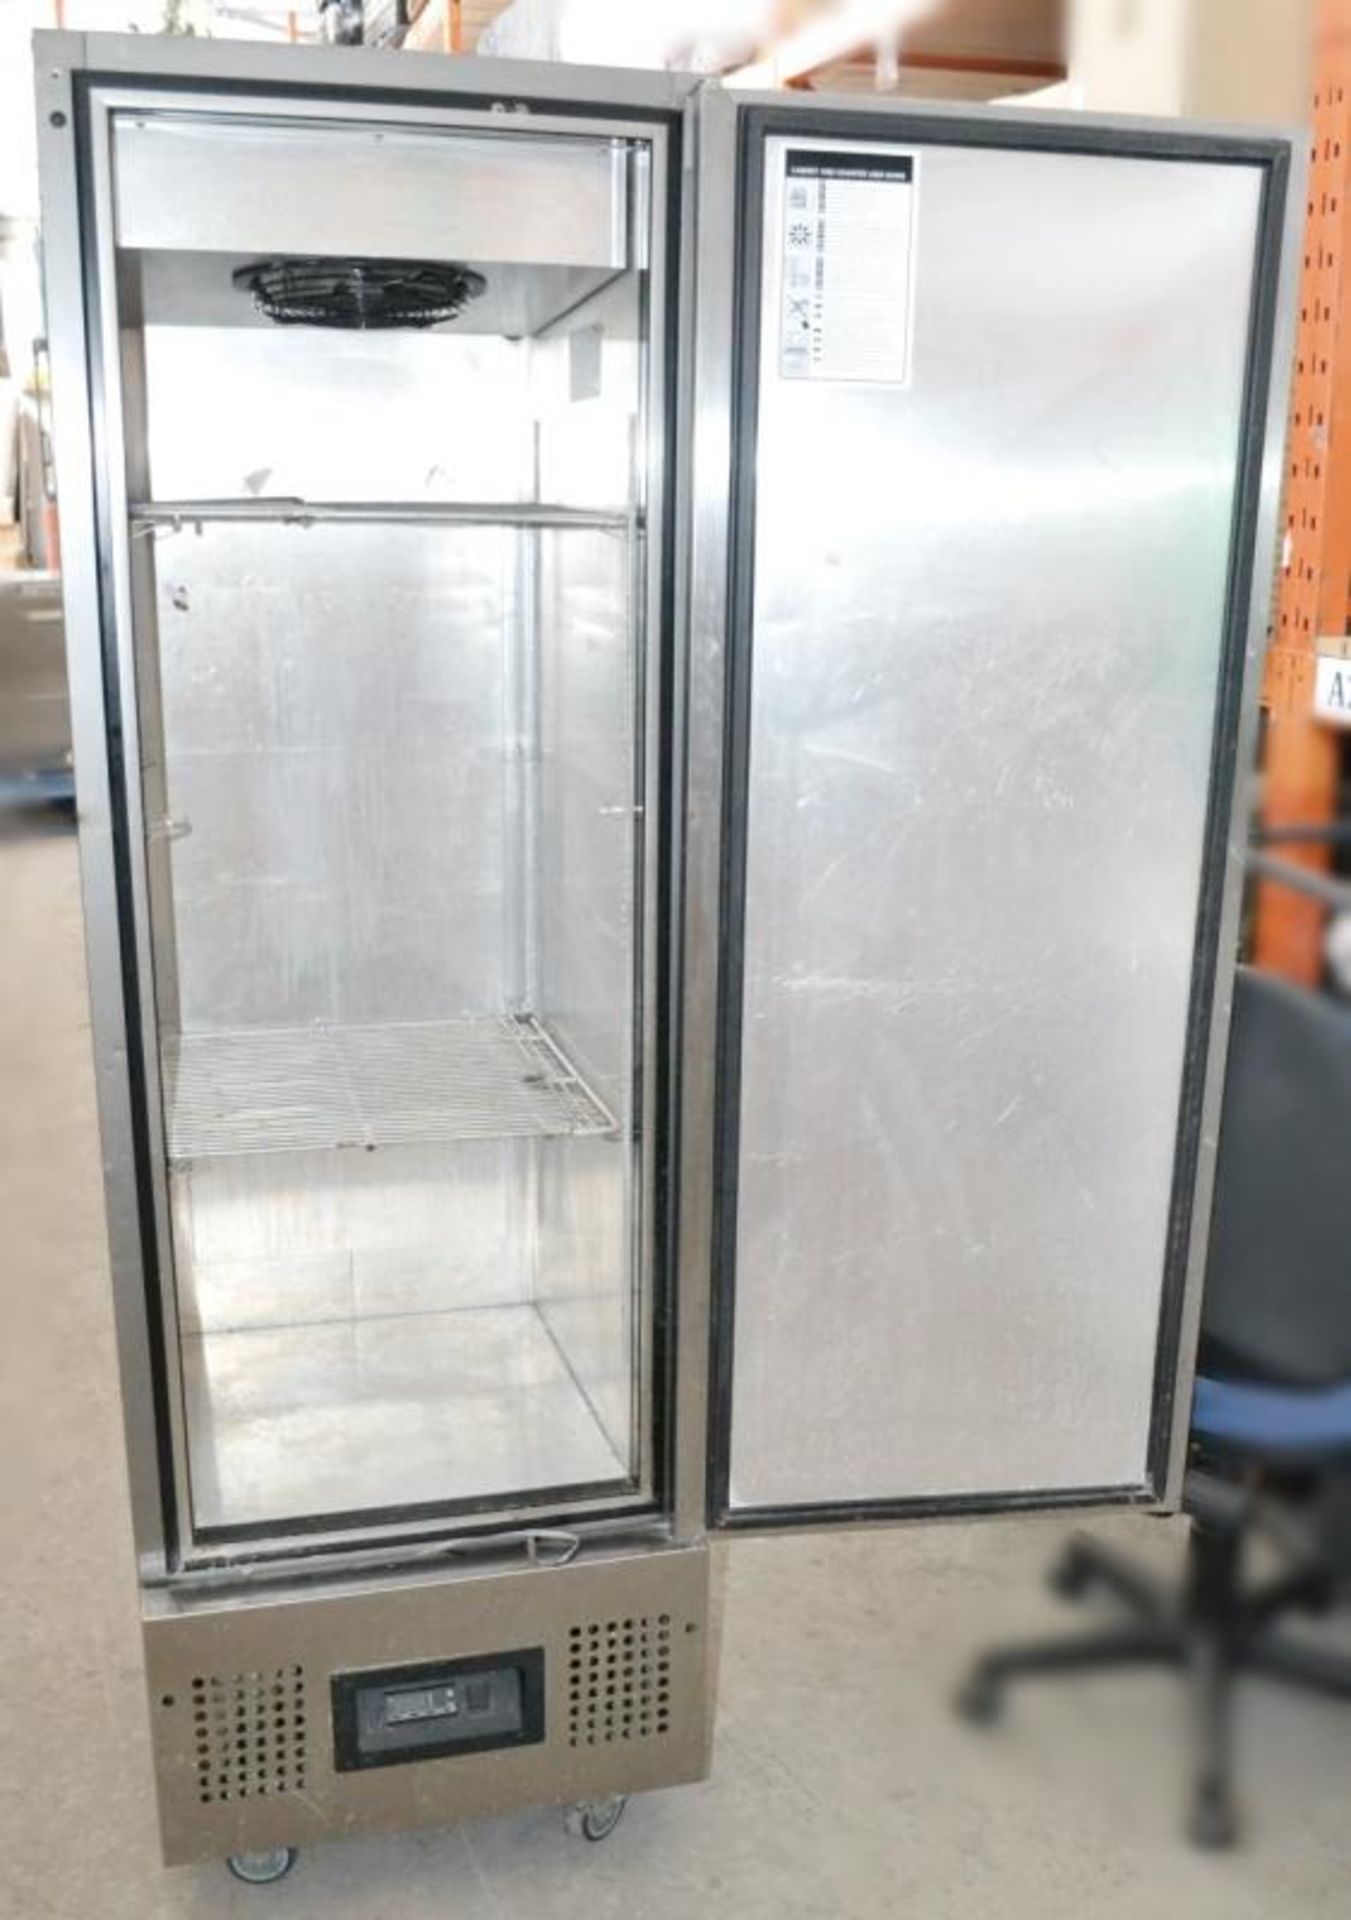 1 x FOSTER FSL400H Upright Slimline Commercial Refrigerator - Stainless Steel - Dimensions: W60 x D6 - Image 2 of 9